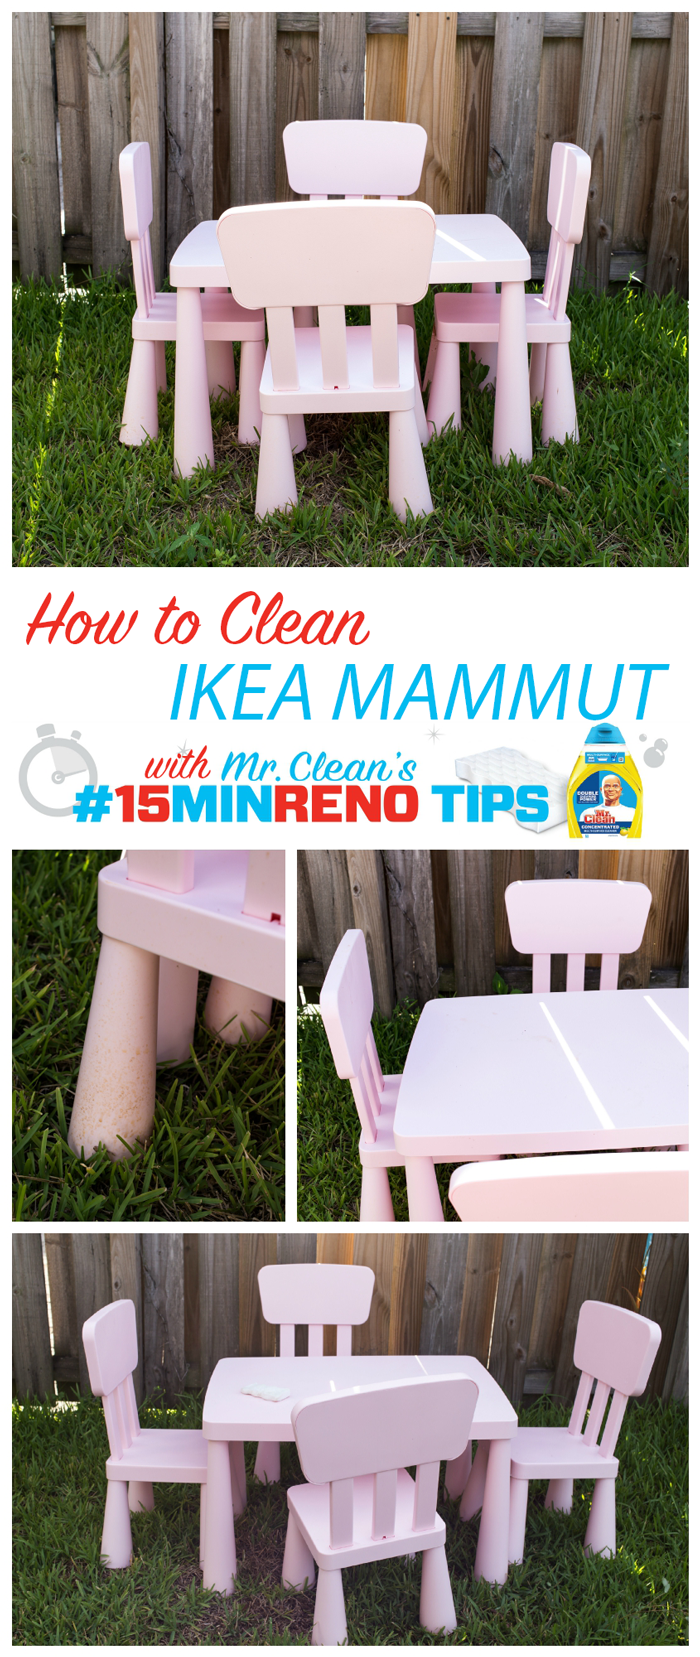 HOW TO CLEAN IKEA MAMMUT | MR. CLEAN MAGIC ERASER USES